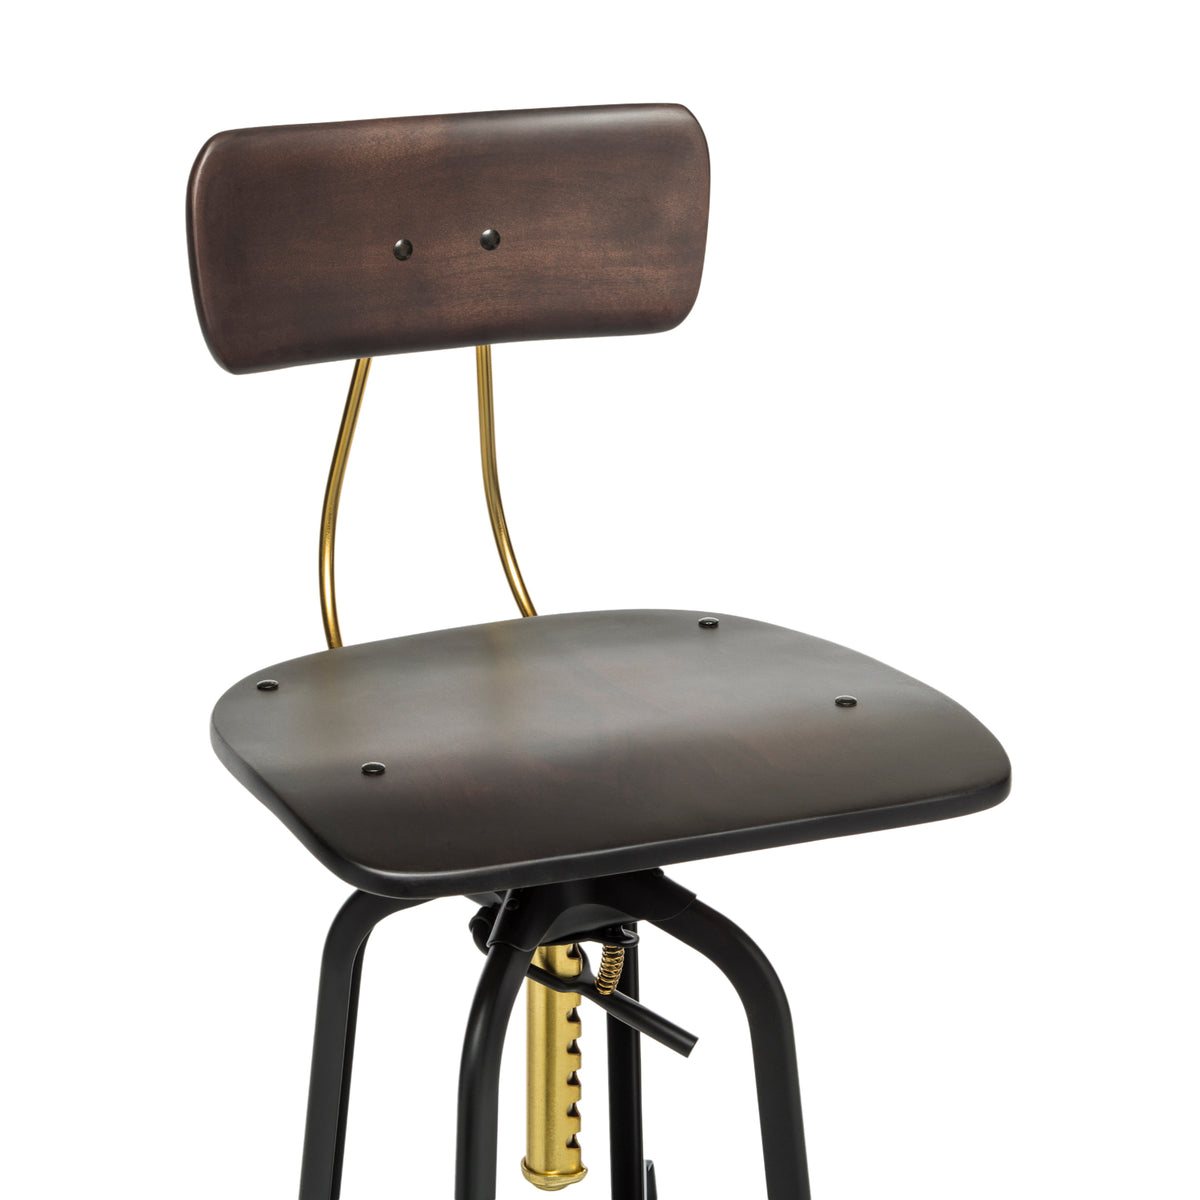 Gold &amp; Black Wooden Bar Stool with Timber Finish - Wine Stash